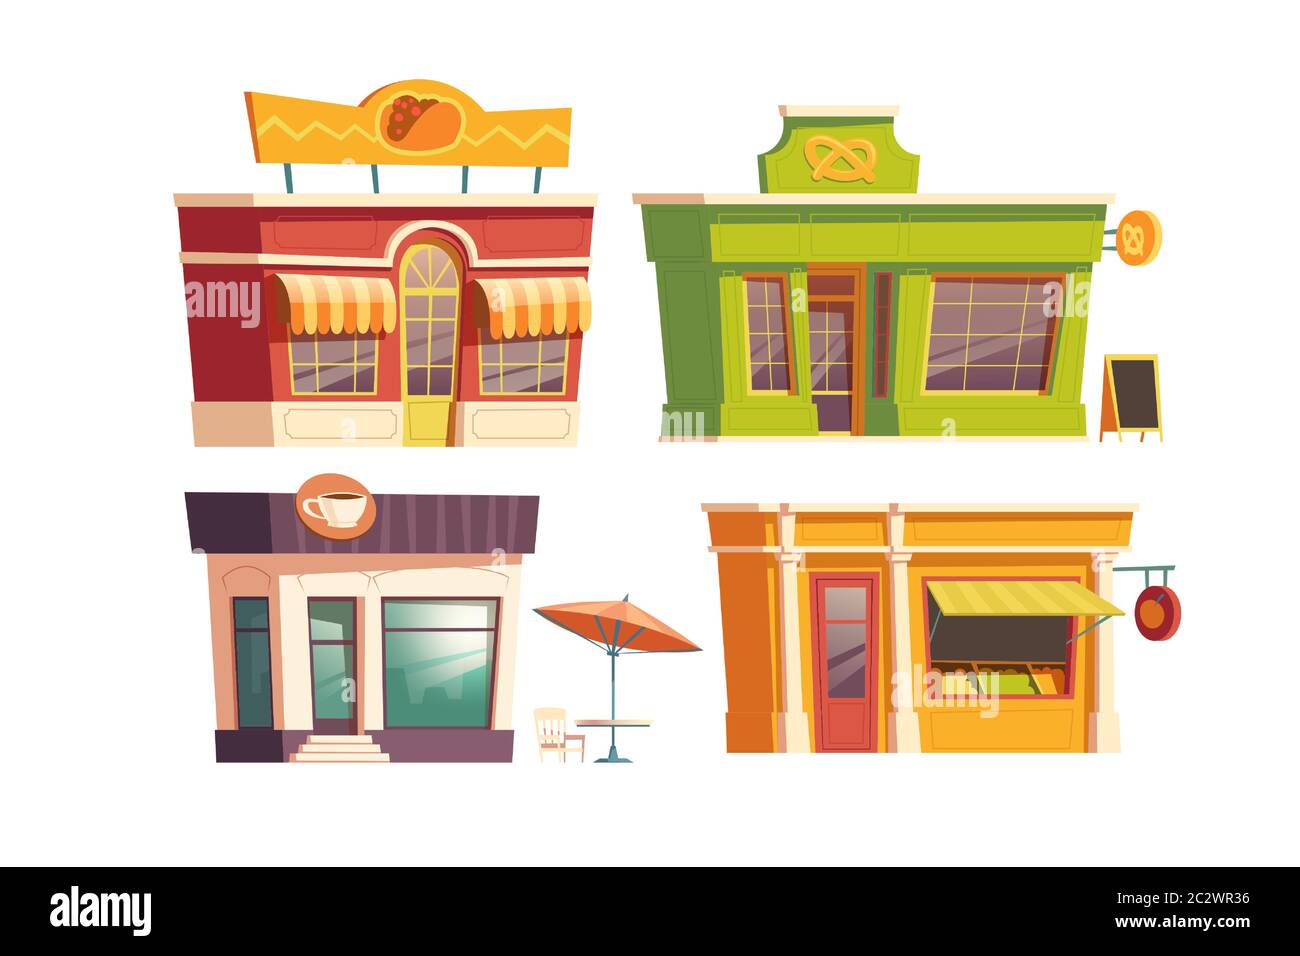 Fast food restaurant building cartoon vector illustration. Facades of food shops and cafes or bistros with signboards of coffee, pretzel, tacos. City Stock Vector